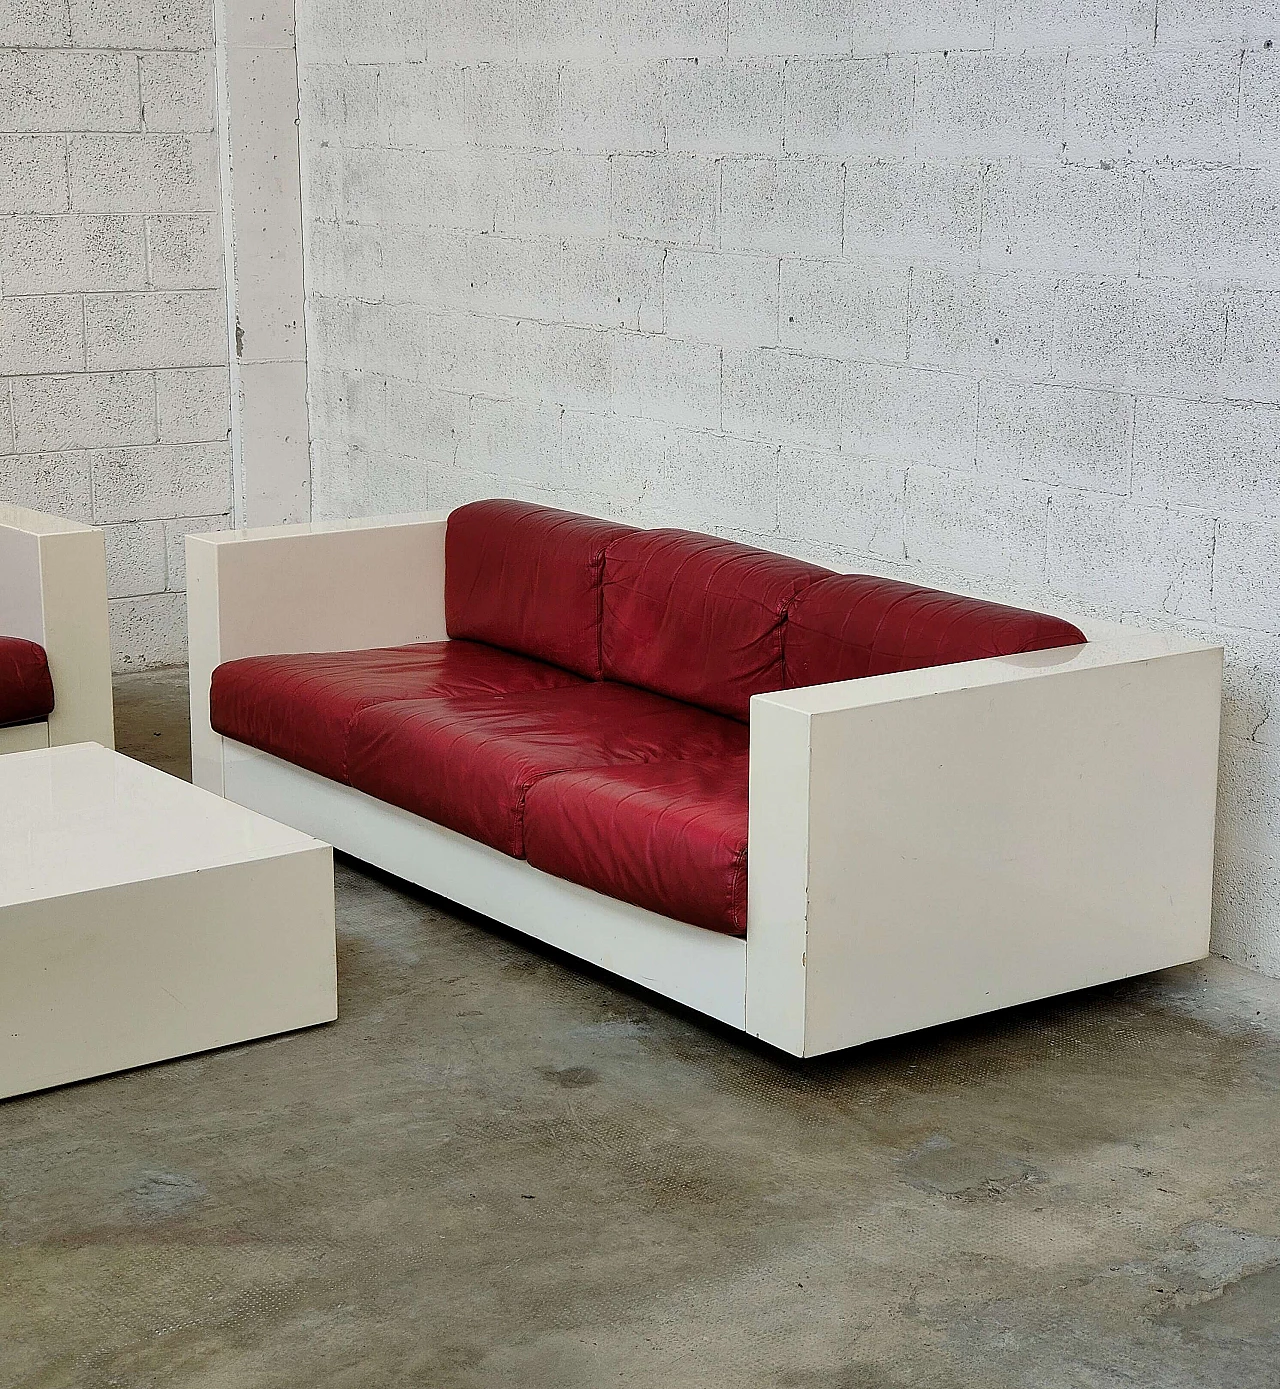 Pair of Saratoga sofas and coffee table by Lella and Massimo Vignelli for Saratoga, 1964 6